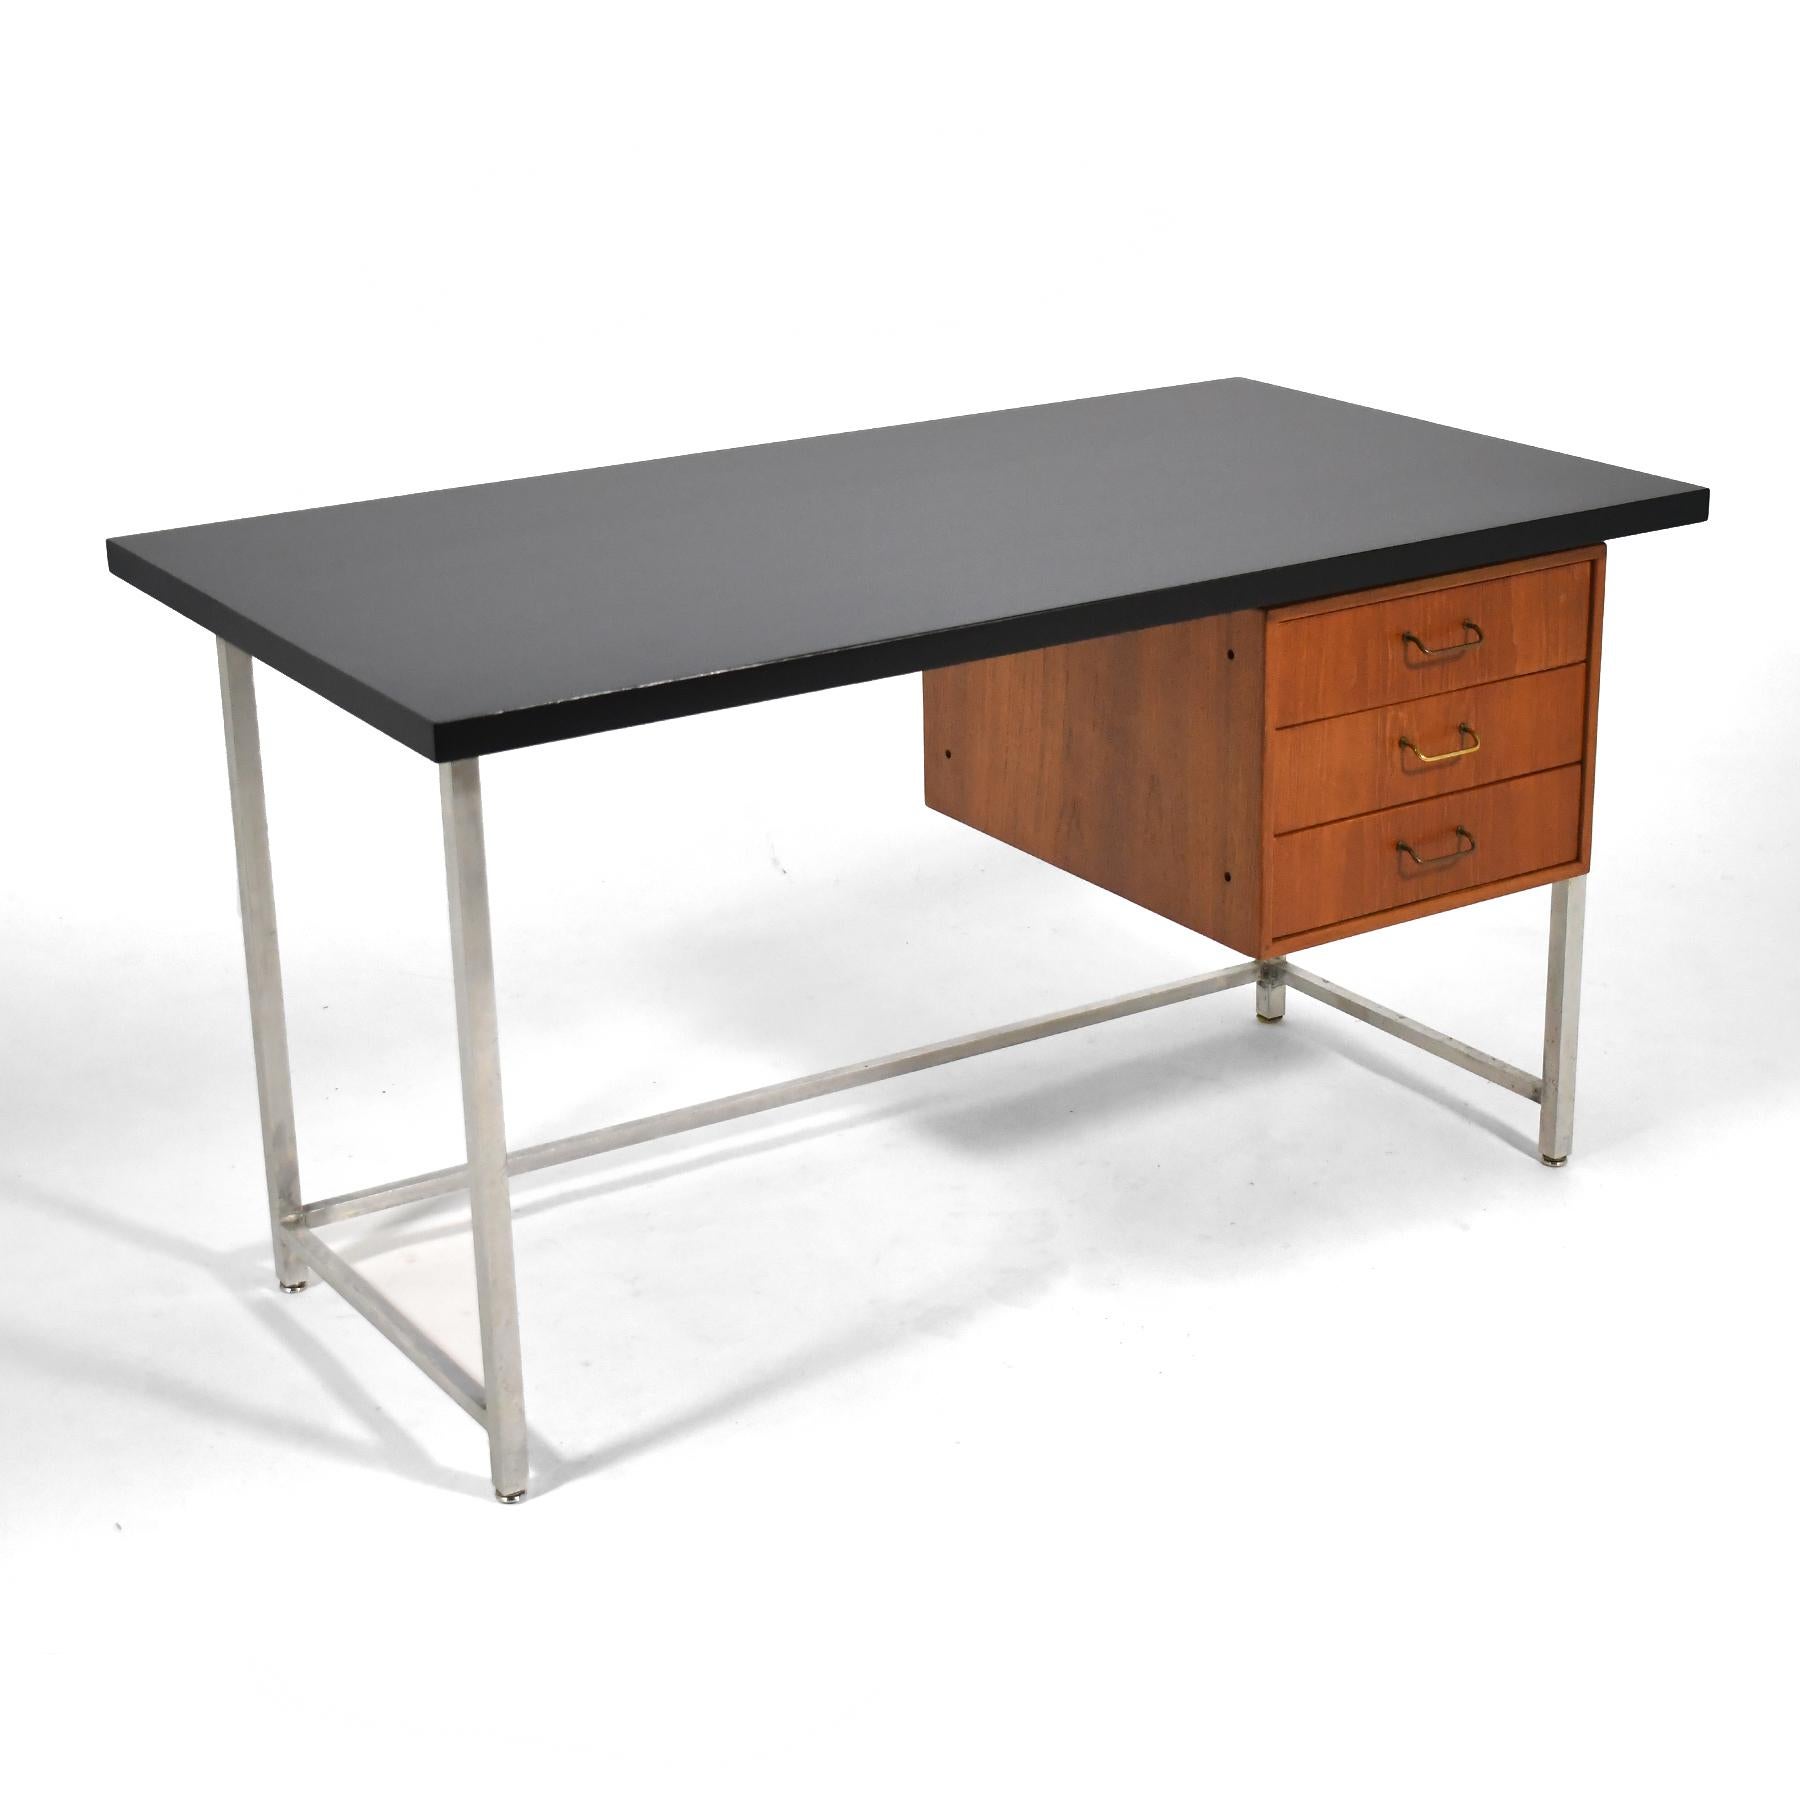 This beautiful Danish modern writing desk by Torben Strandgaard is finely crafted by Møbelfabriken Falster and beautifully detailed with an architectural aluminum frame, floating cabinet with brass wire pulls on the three drawers. The case is